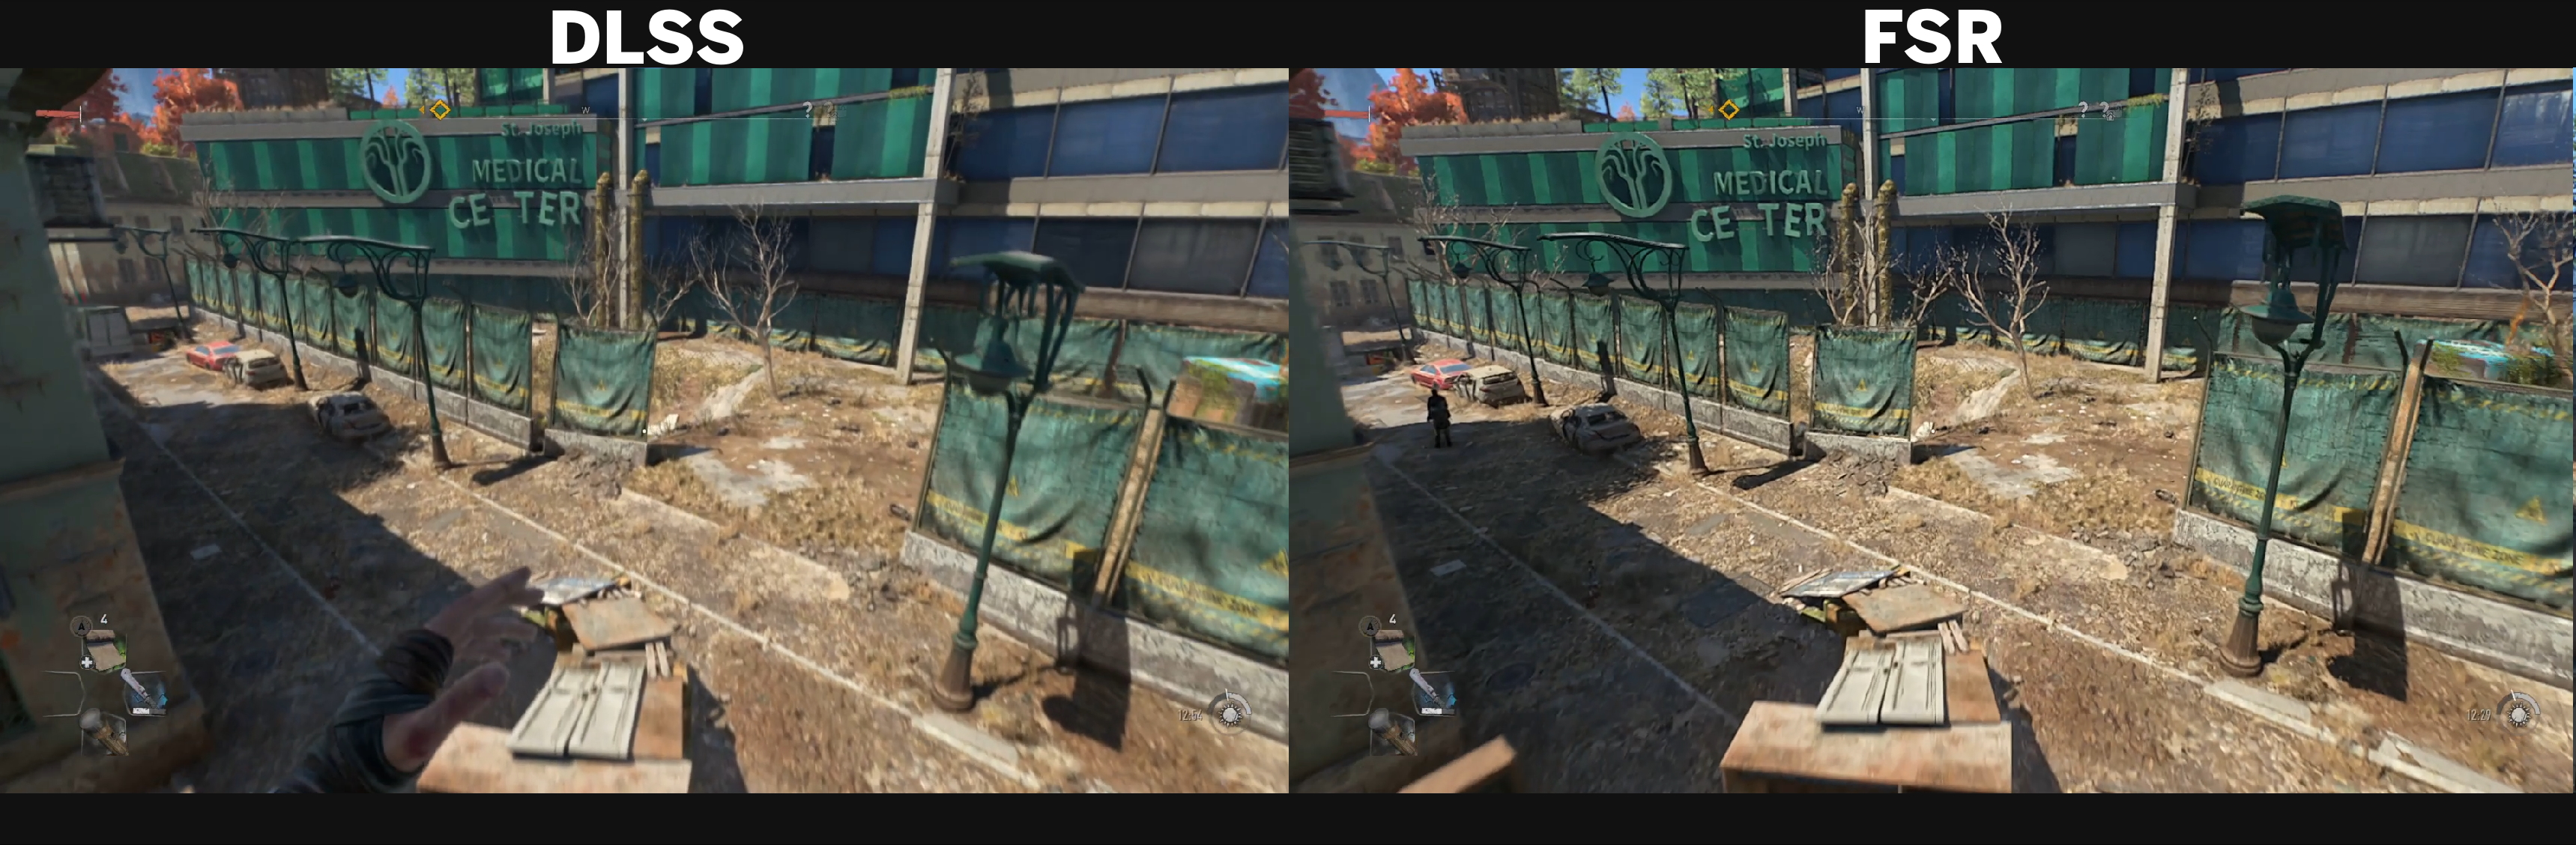 Dying Light 2 image comparisons between FSR and DLSS upscaling